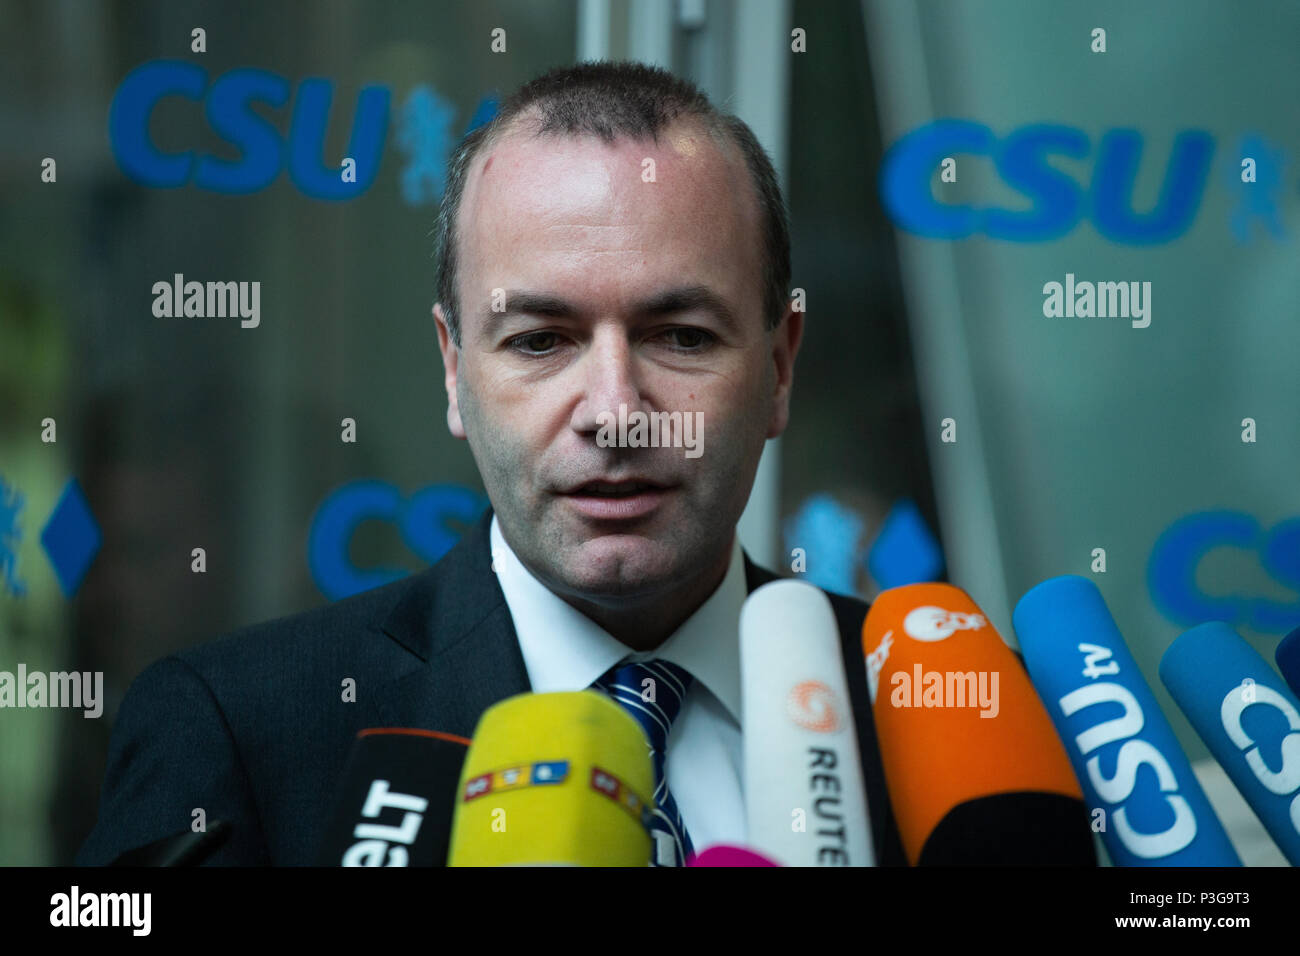 Munich, Germany. 18th June, 2018. The head of the conservative faction in the EU parliament Manfred Weber makes a statement. The Christian Social Union (CSU) held a board meeting, where they discussed about the argue with German Chancellor Angela Merkel and her Christian Democratic Union about the refugee crisis and migration. Credit: Alexander Pohl/Pacific Press/Alamy Live News Stock Photo